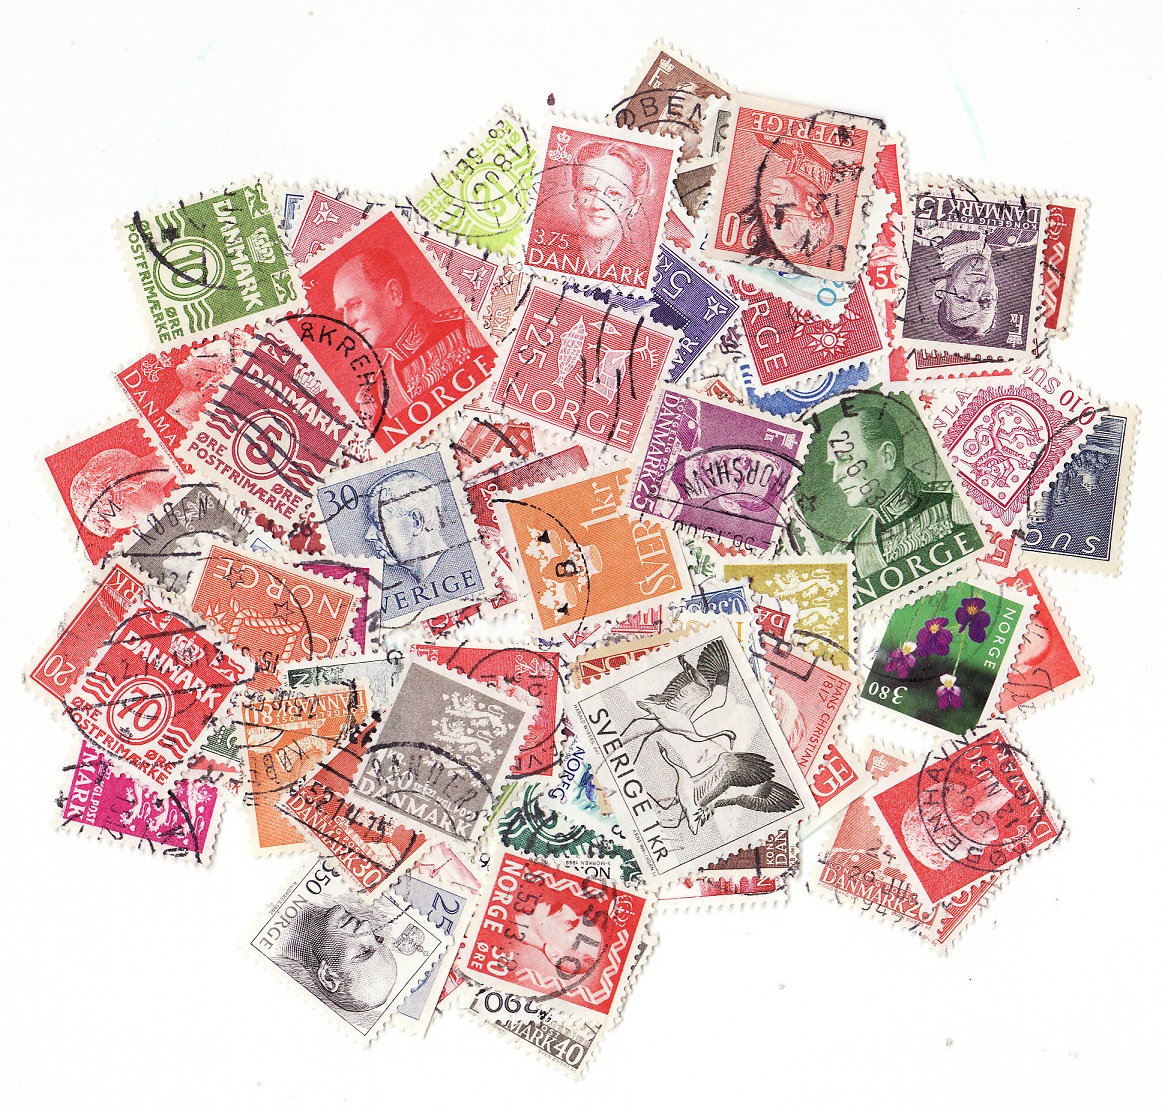 Scandinavia Stamp Packet, 300 different stamps from Scandinavia